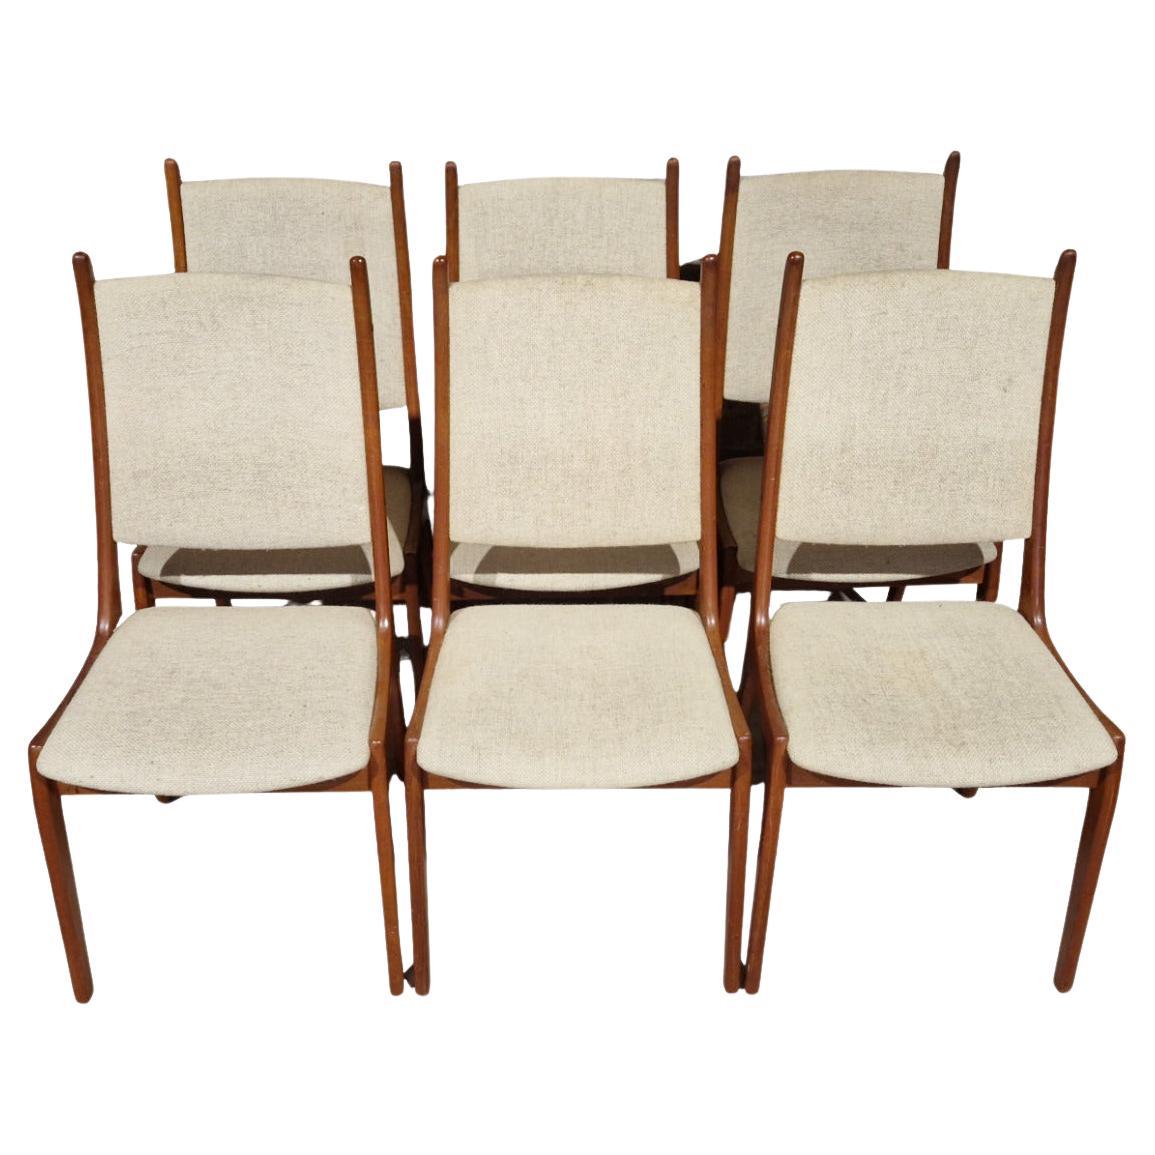 Set of 6 vintage chairs by Korup Stolefabrik, Denmark, 1960s For Sale